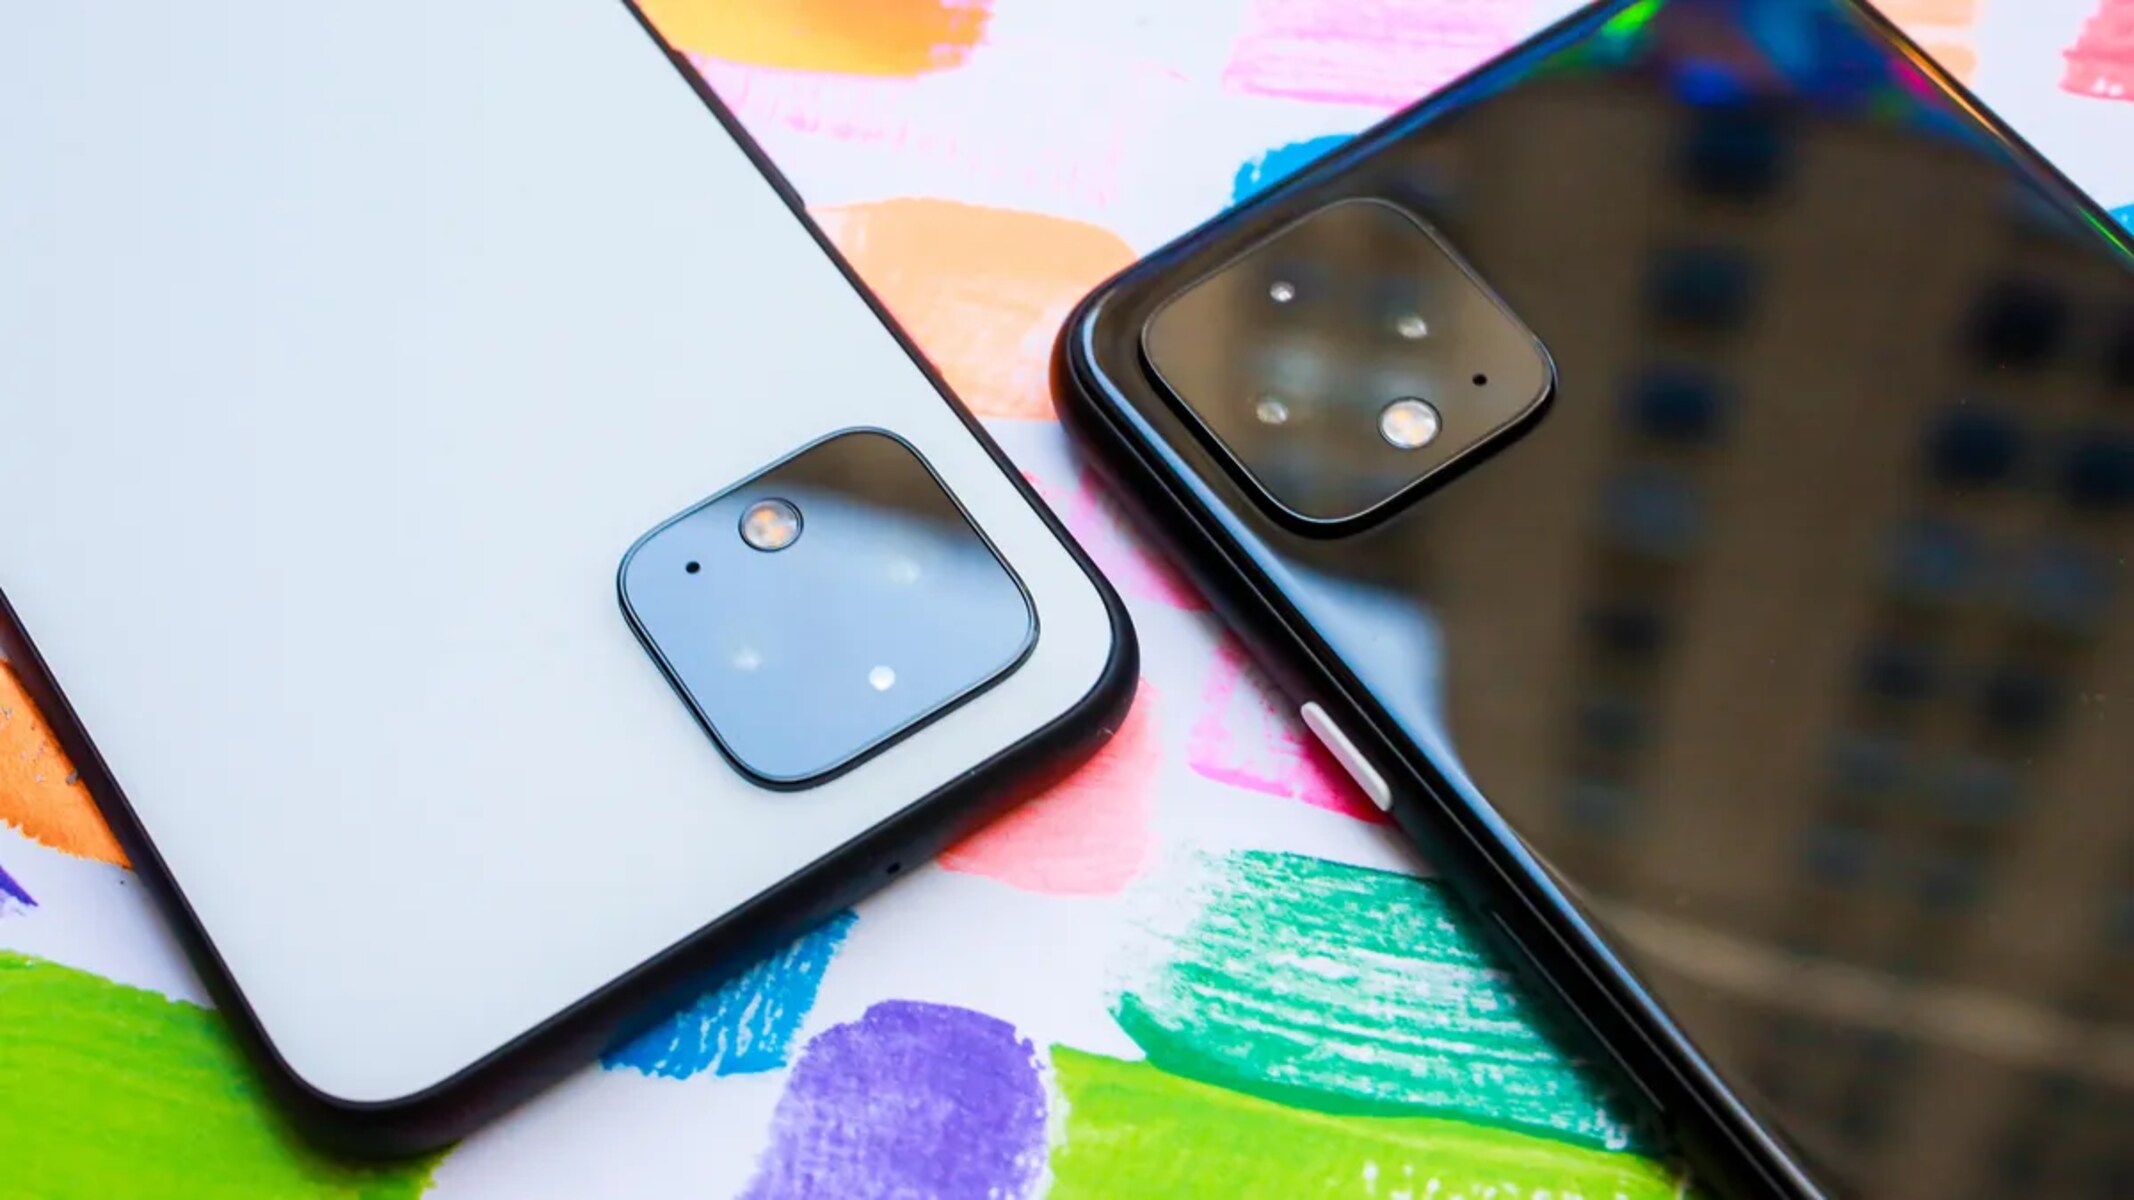 Organize Your Pixel 4 Home Screen: Adding Apps Guide